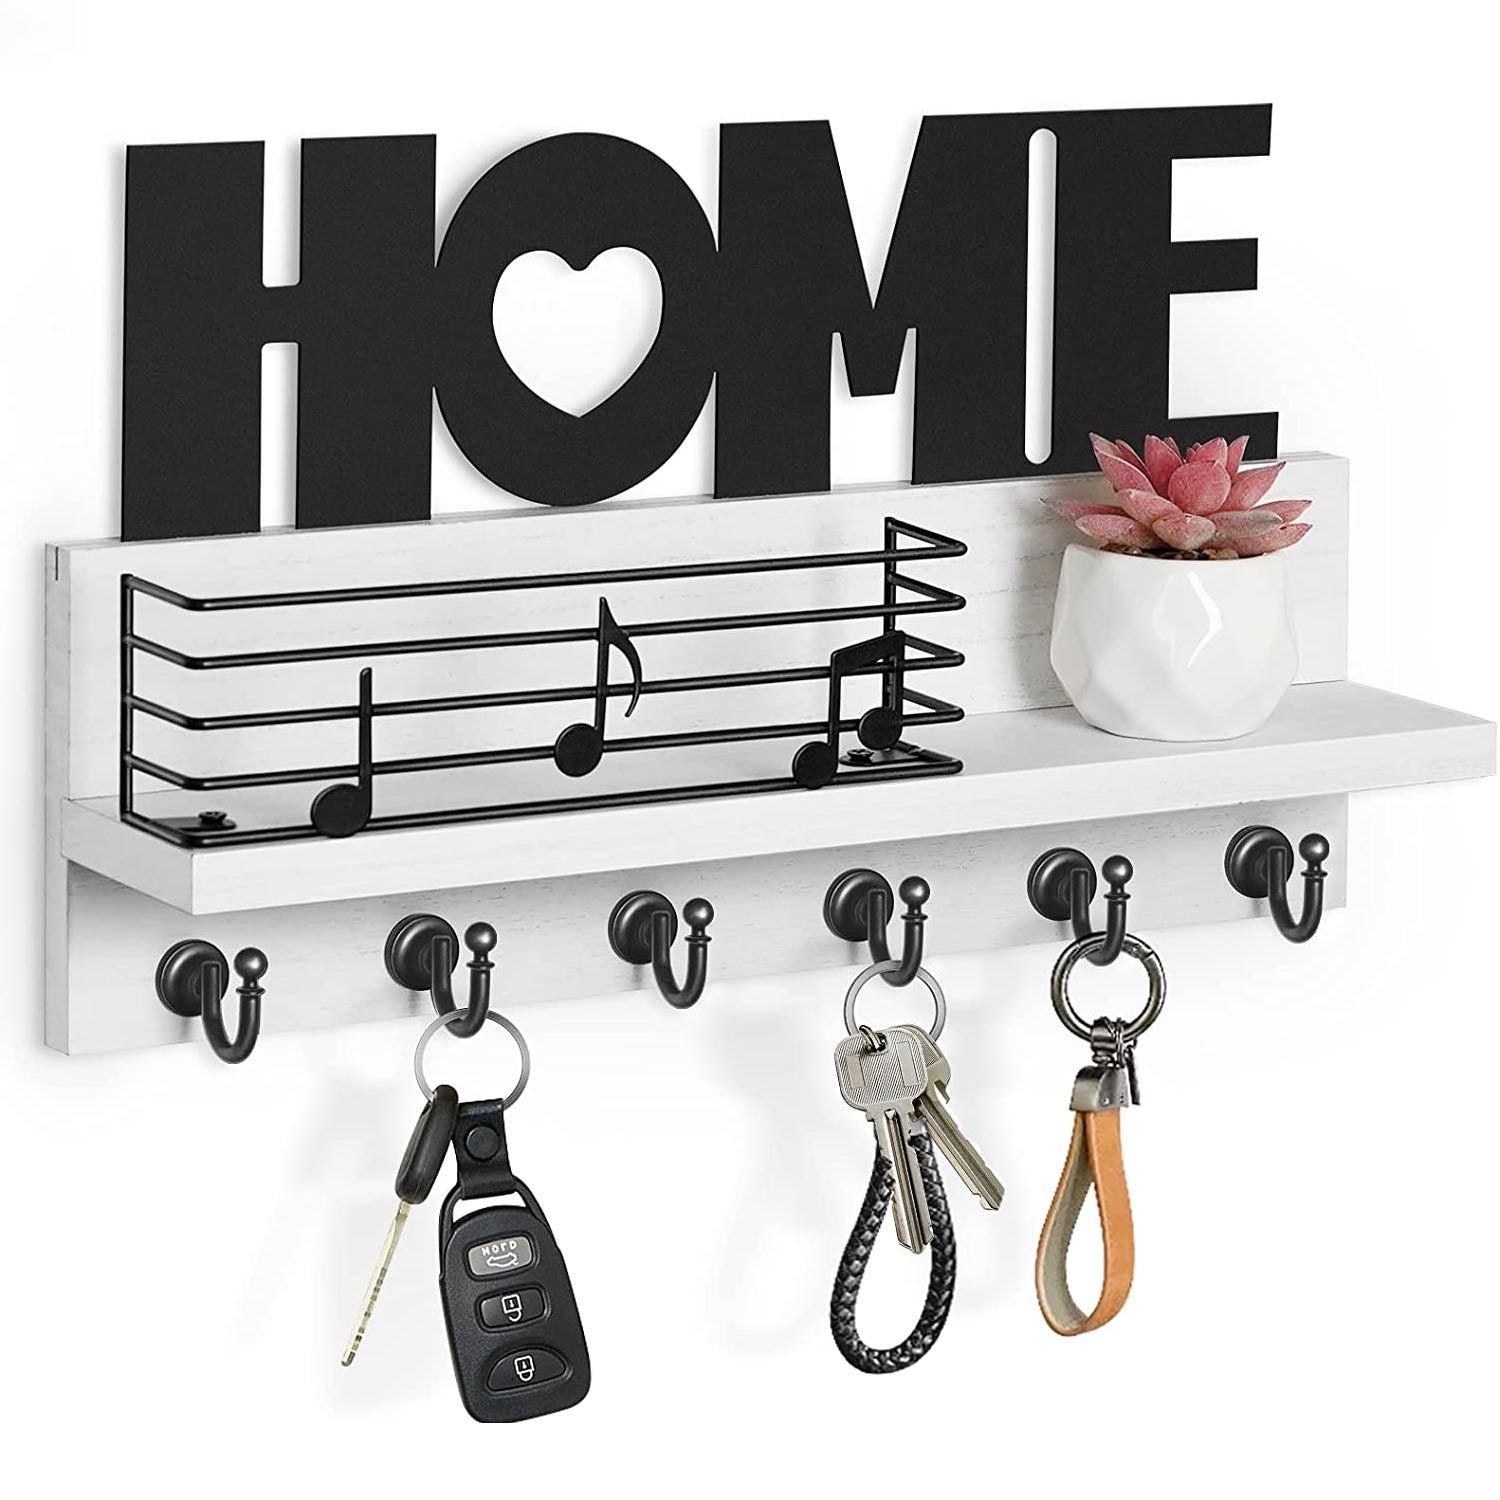 Key and Mail Holder for Wall, Decorative Hanging Organizer with Floating  Shelf and 5 Sturdy Keys Hooks, Wall Mount Key Rack, White 